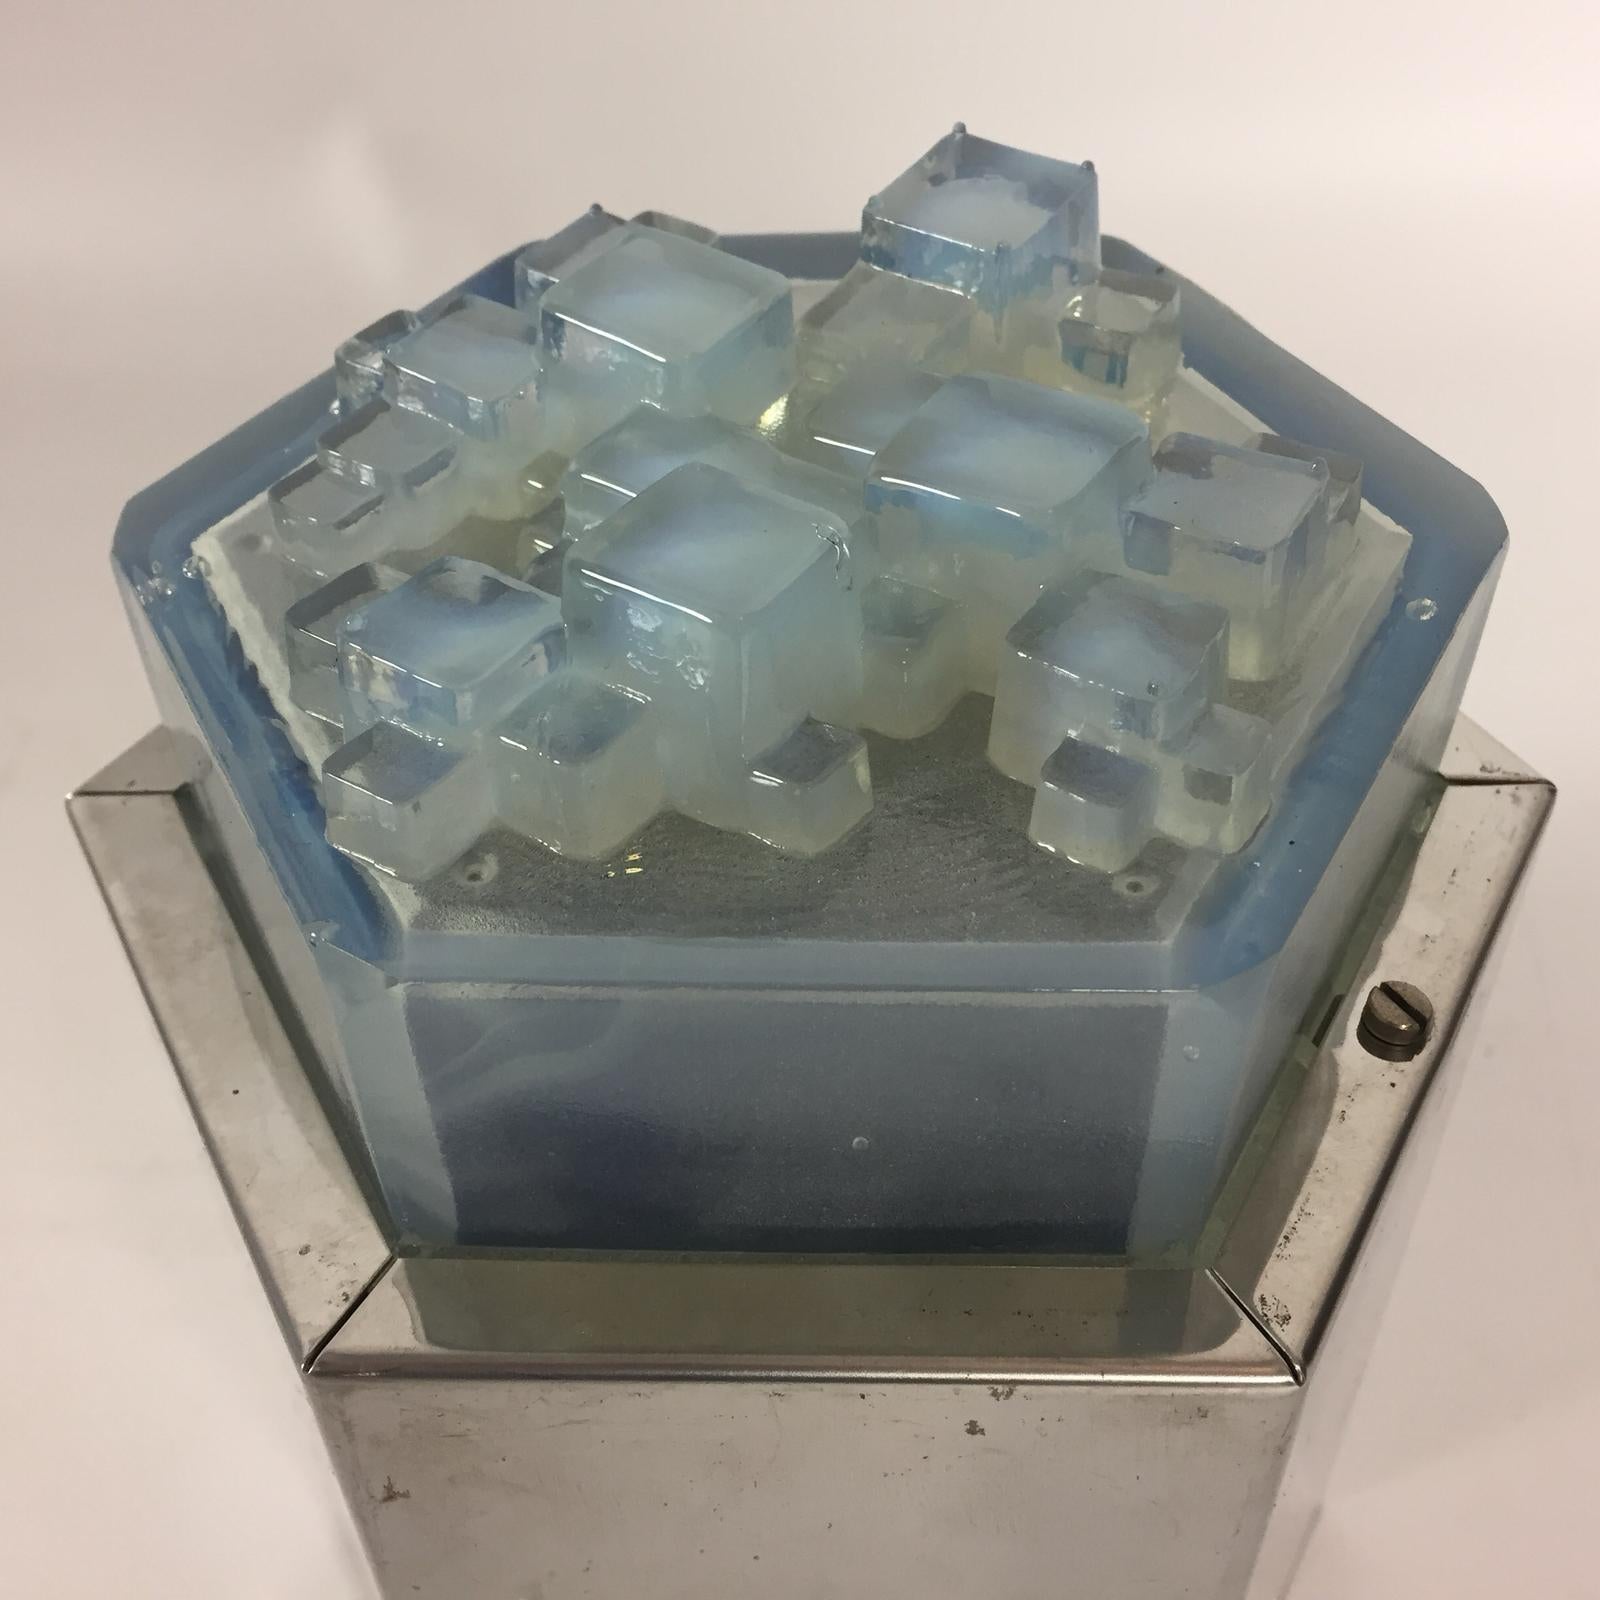 Stunning Poliarte glass and chrome hexagon flush mounts. The blue glass has a geometric 3-dimensional detail. Chrome fixture with some patina. Newly re-wired. Sold individual, 4 pieces available. Can be used as a wall lamp or as a ceiling lamp.